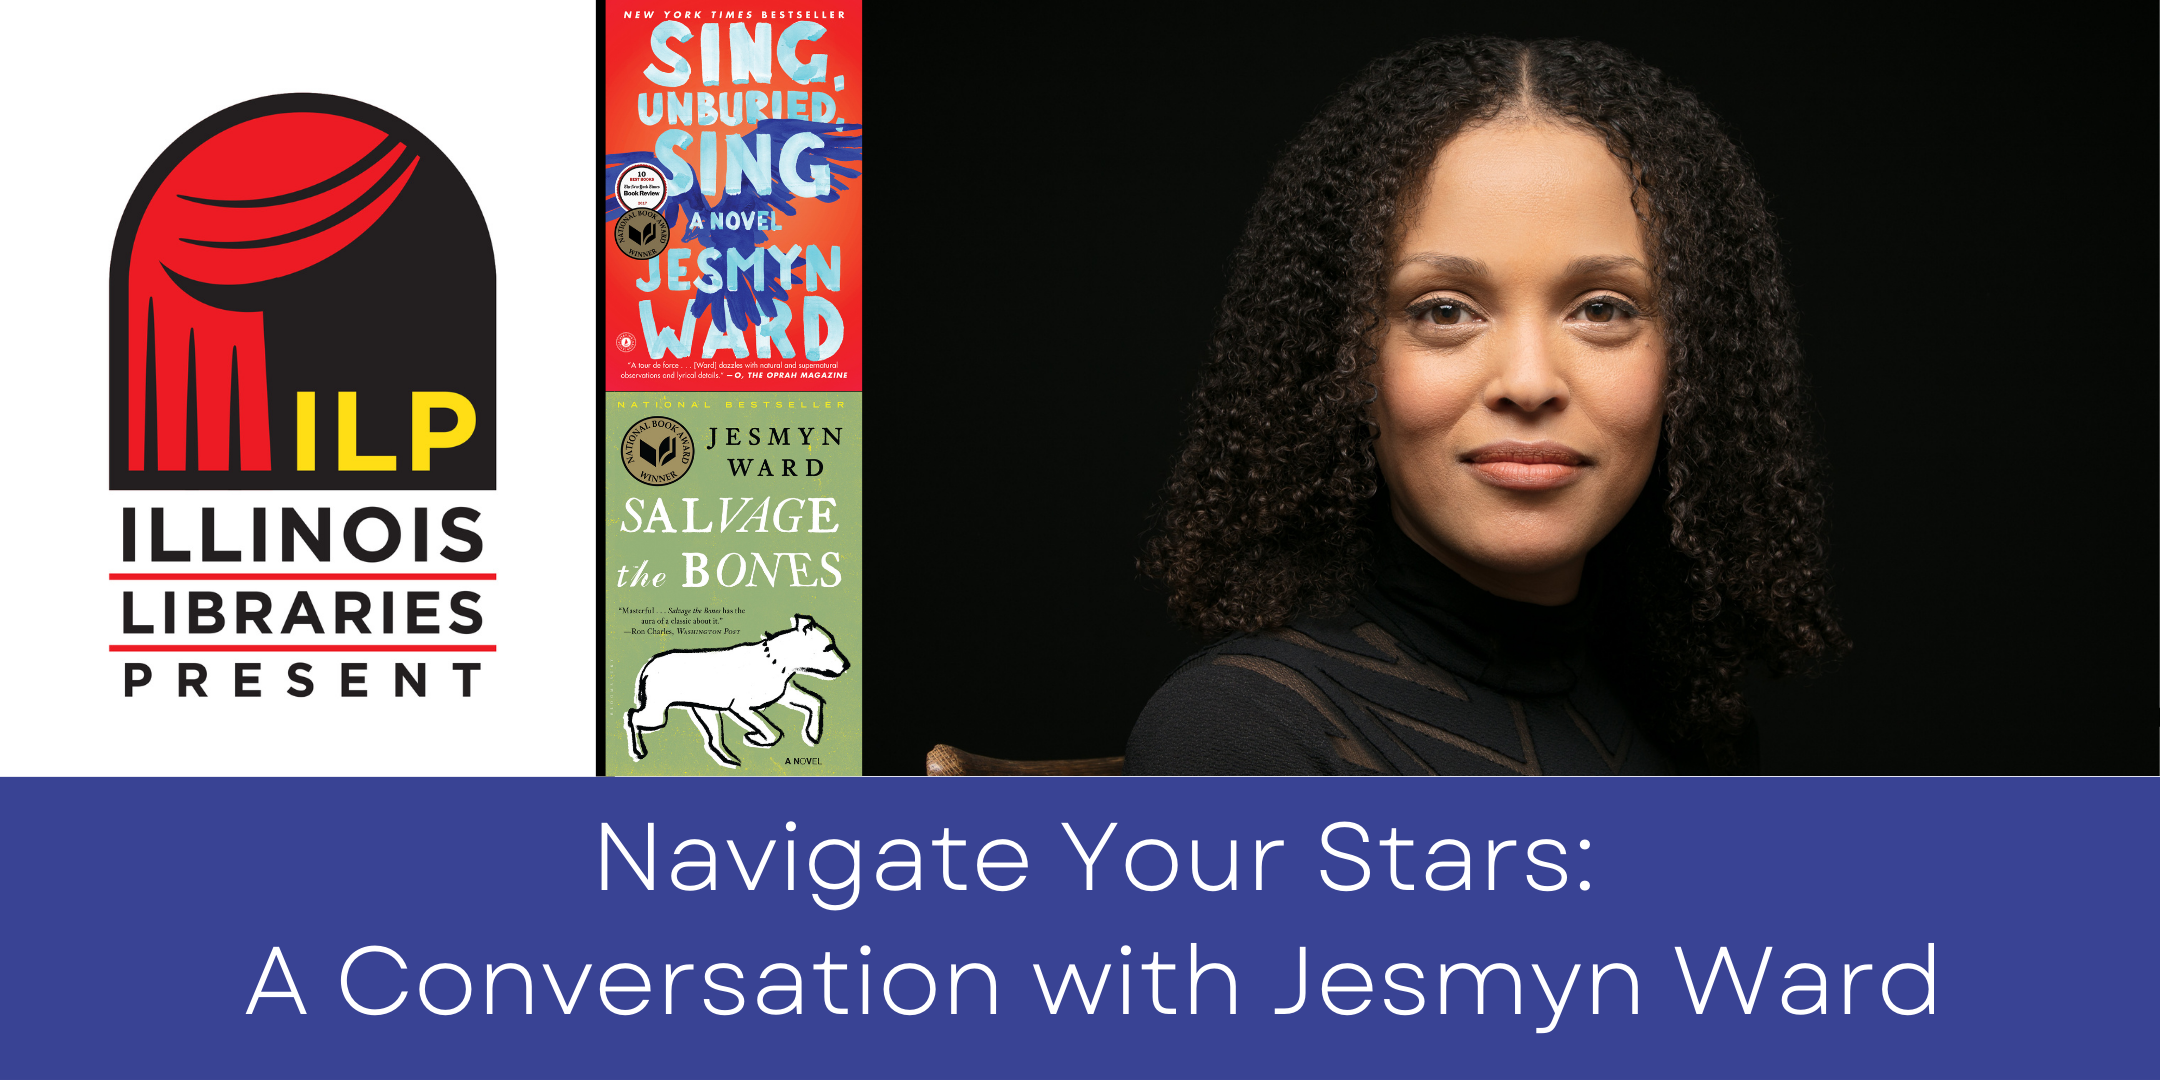 image of "Navigate Your Stars: A Conversation with Jesmyn Ward"